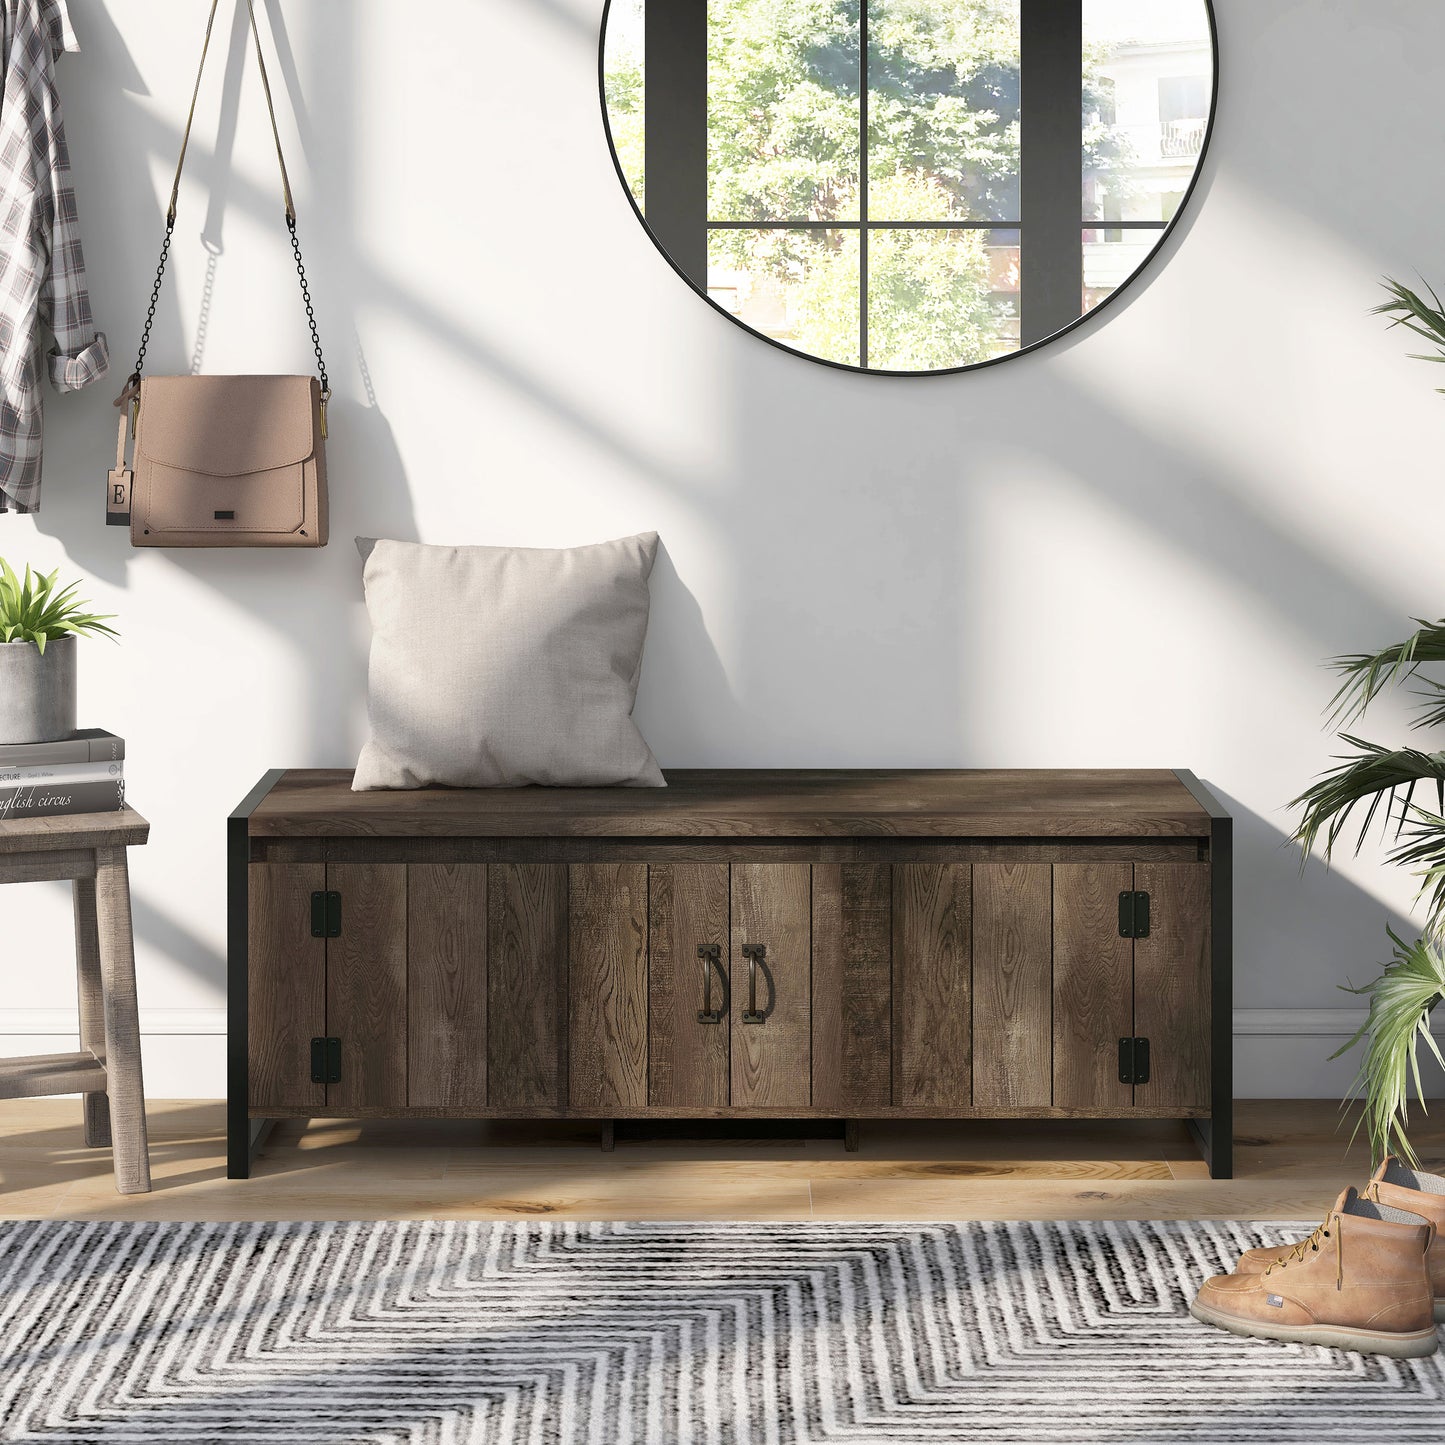 Front-facing industrial reclaimed oak two-door storage bench in an entryway with accessories